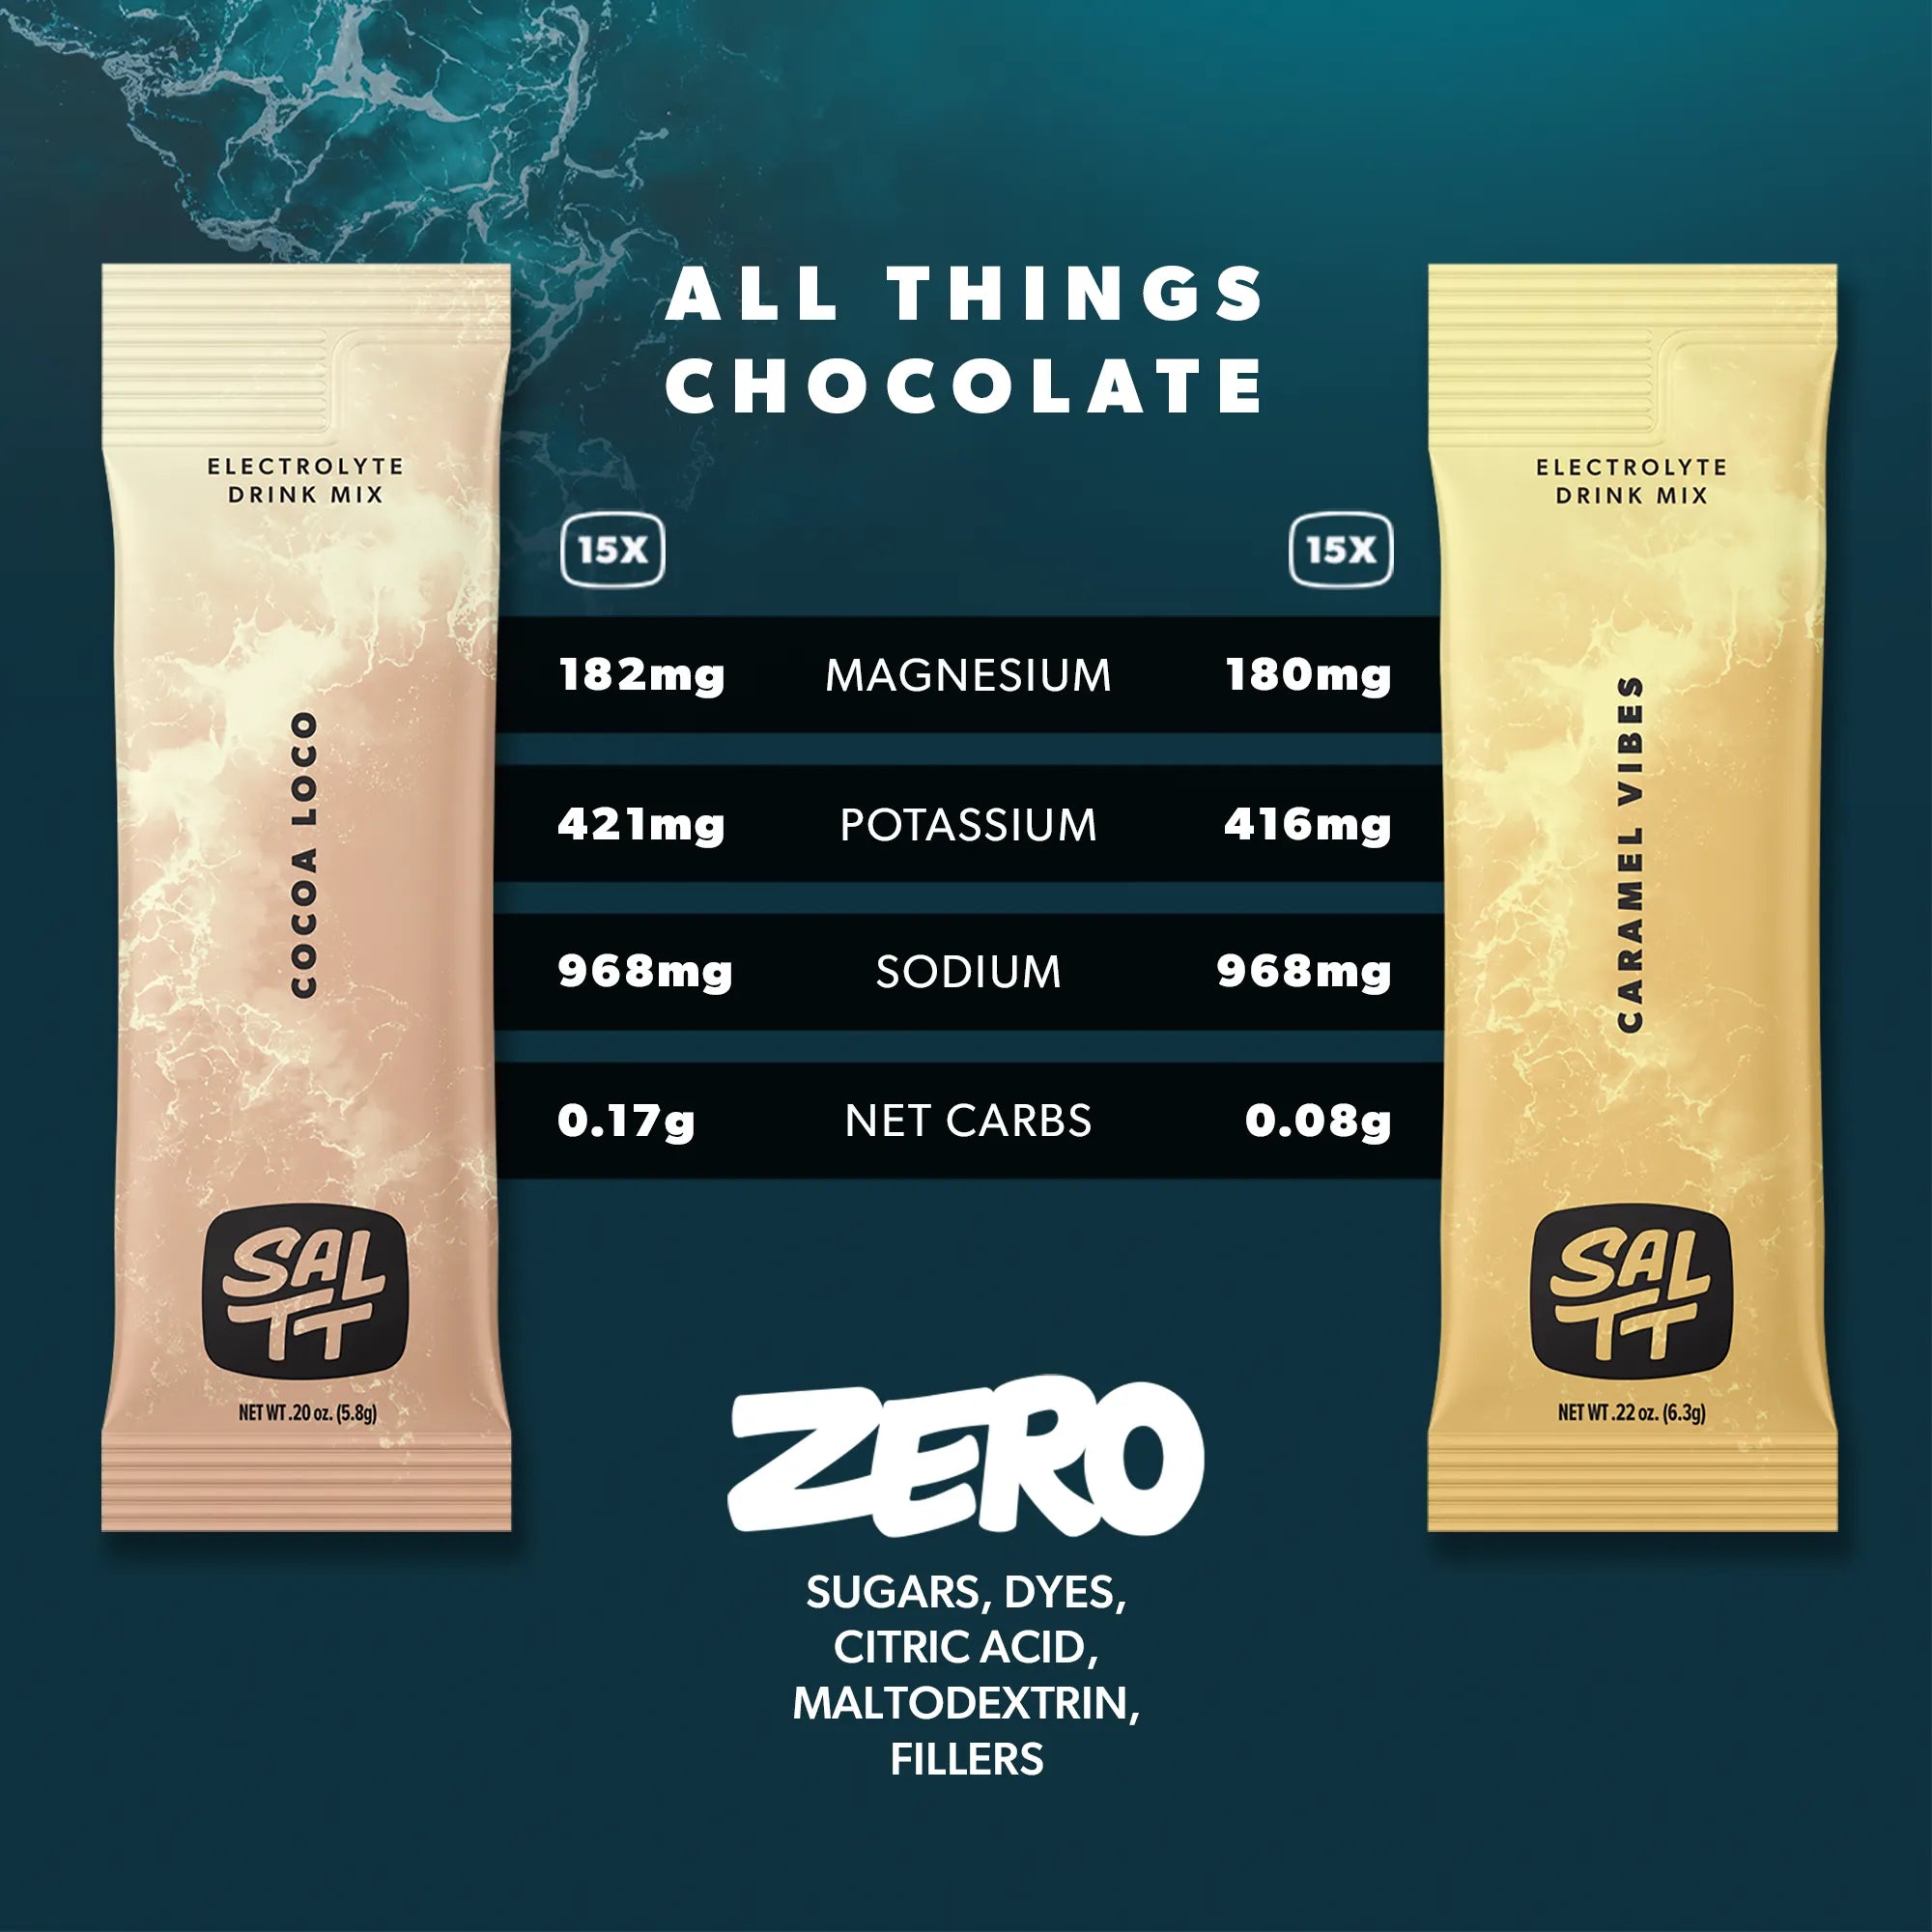 Nutrition for 30 stick All Things Chocolate Variety Pack. Cocoa Loco has 182mg Magnesium, 421mg Potassium, 968mg Sodium, 0.17g net carbs. Caramel Vibes has 180mg Magnesium, 416mg Potassium, 968mg Sodium, and 0.08g net carbs. See nutrition dropdown for complete supplement facts.